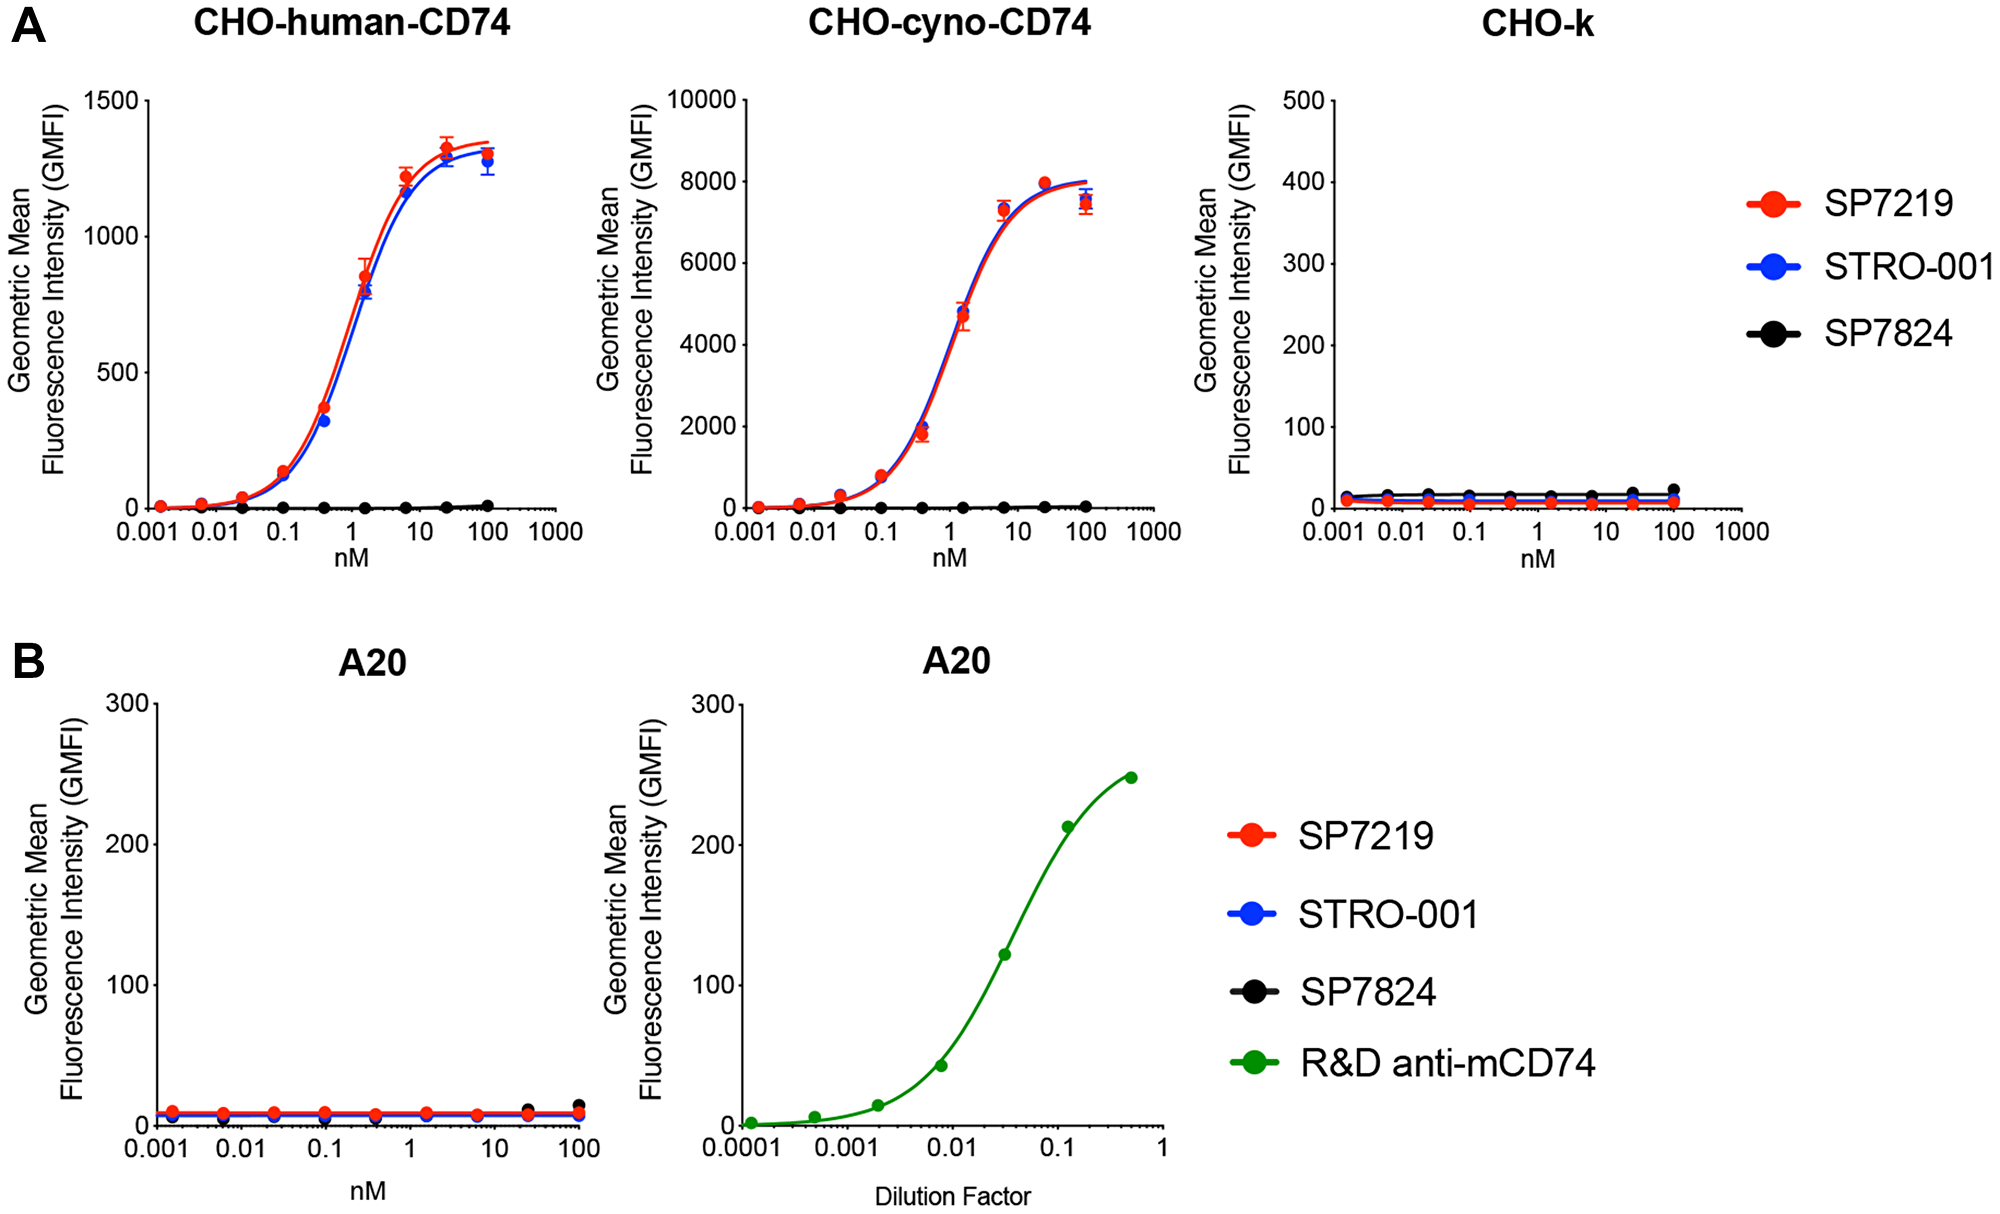 SP7219 and STRO-001 showed similar high affinity binding to human and cynomolgus monkey CD74, no binding to mouse CD74.